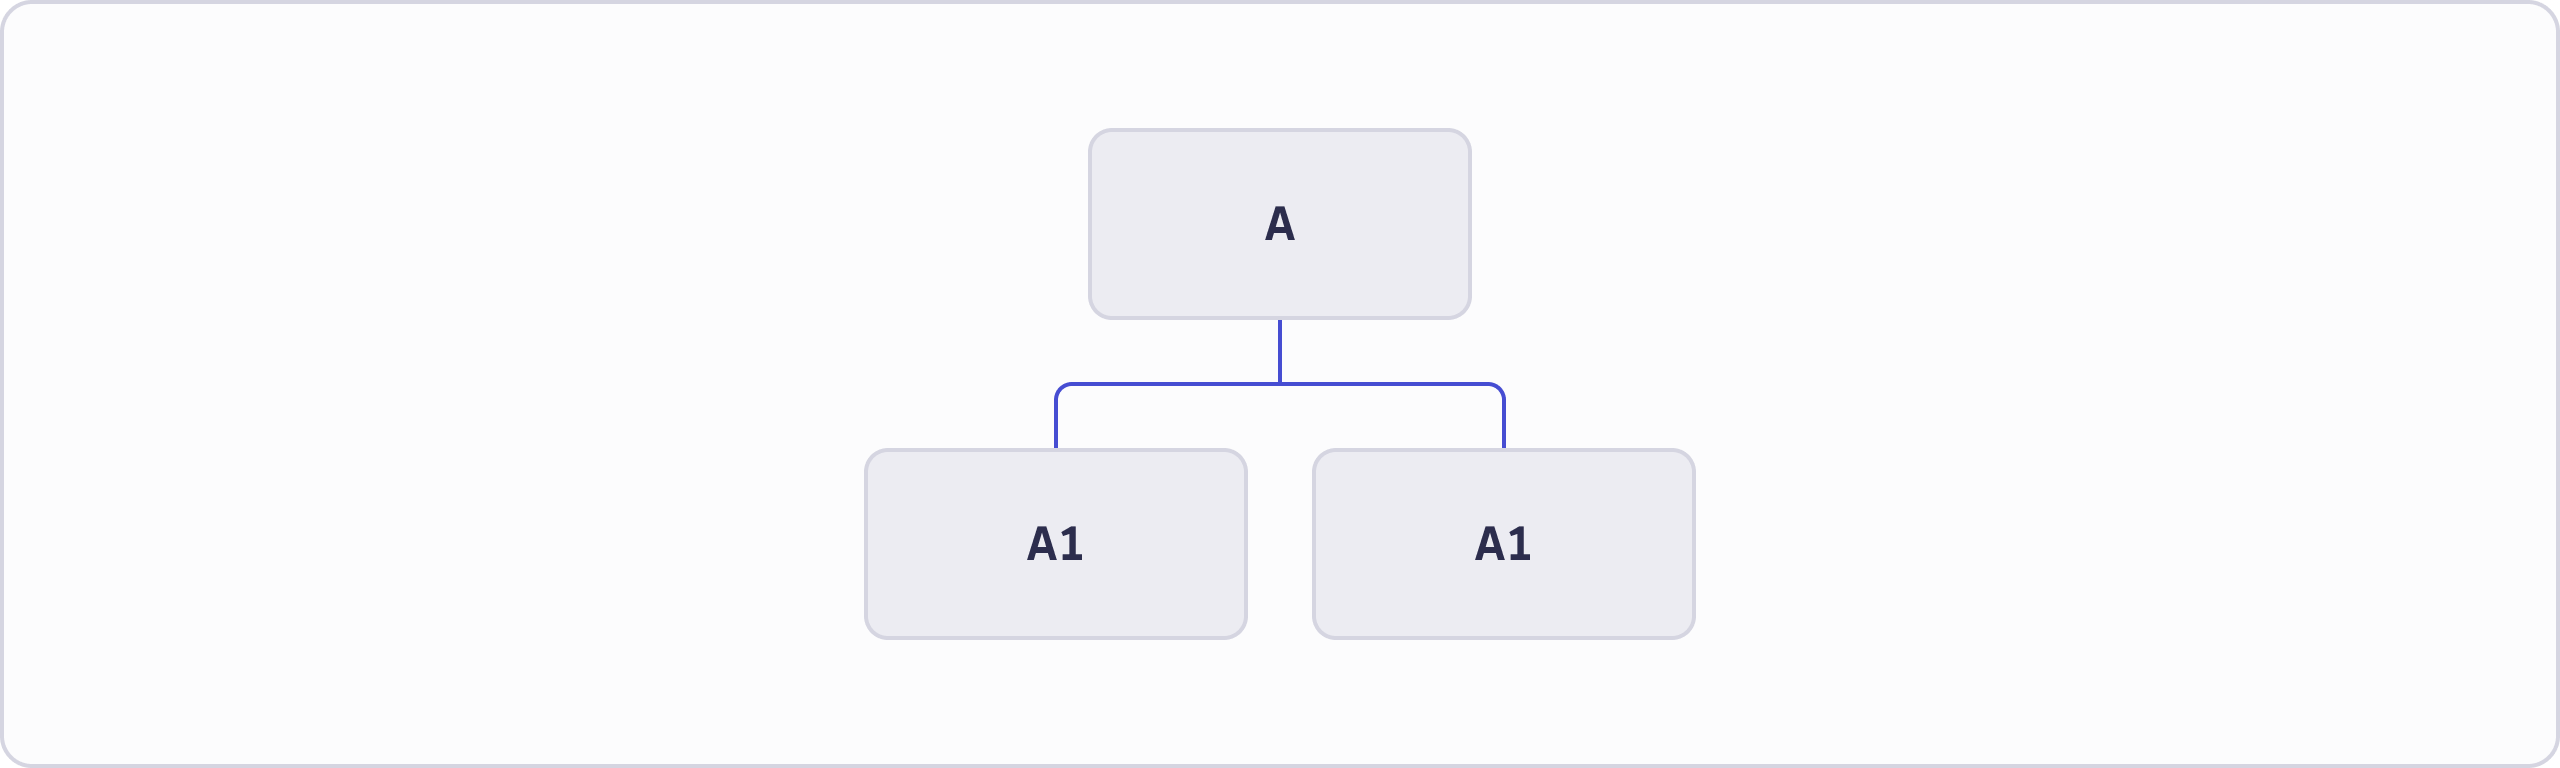 Nested hierarchy